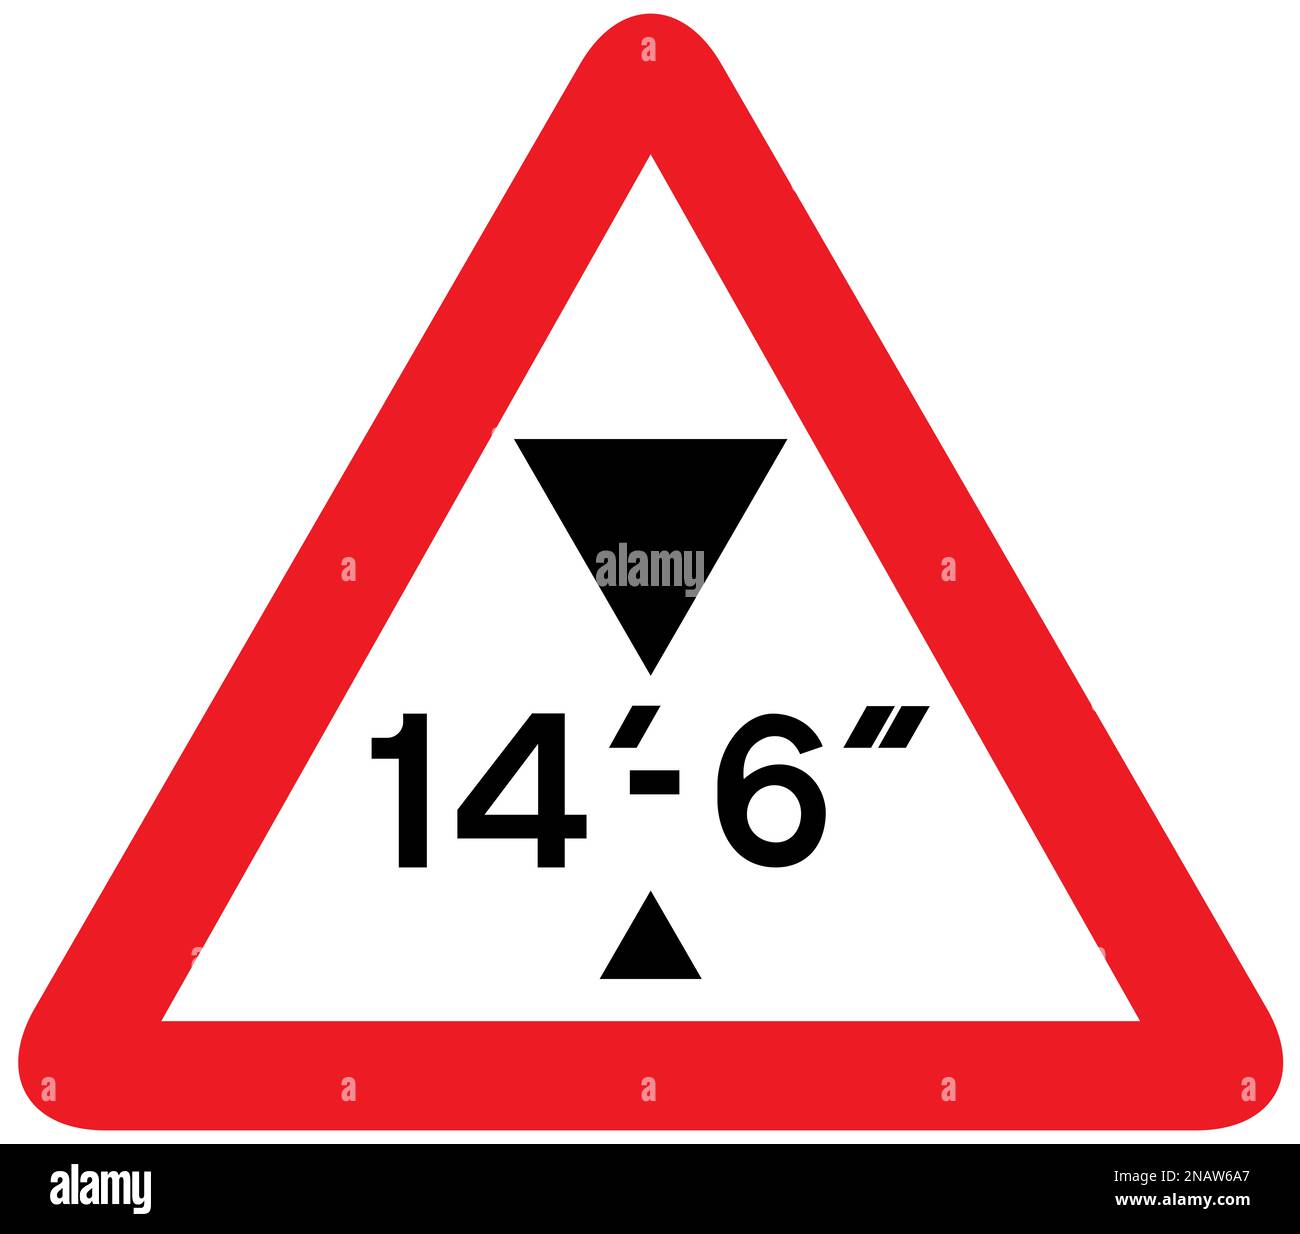 Warning of maximum headroom of arch bridge or overhanging structure some distance ahead  British road sign Stock Photo